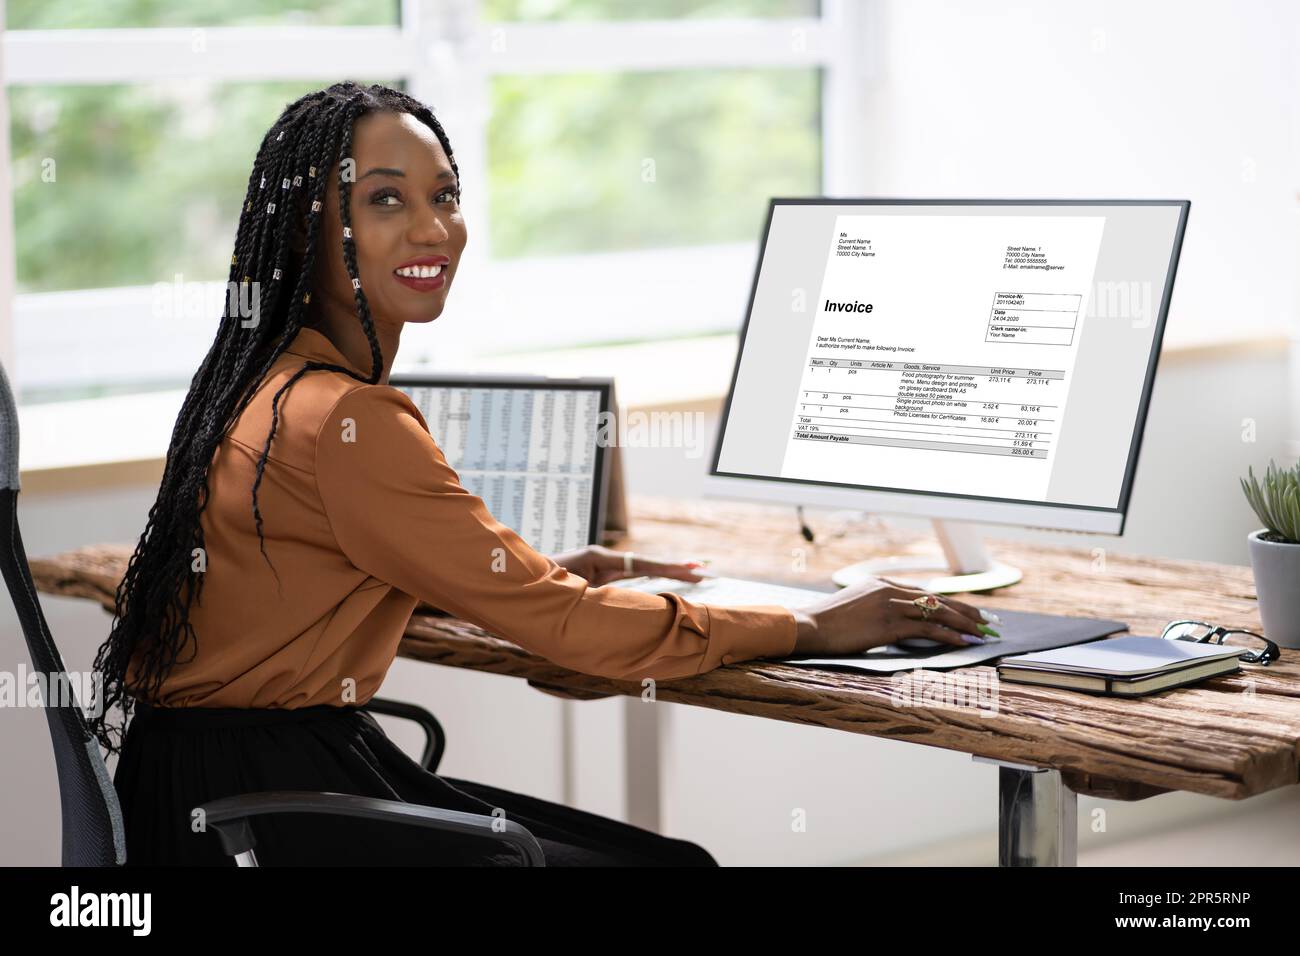 African American Lady Using Computer Stock Photo